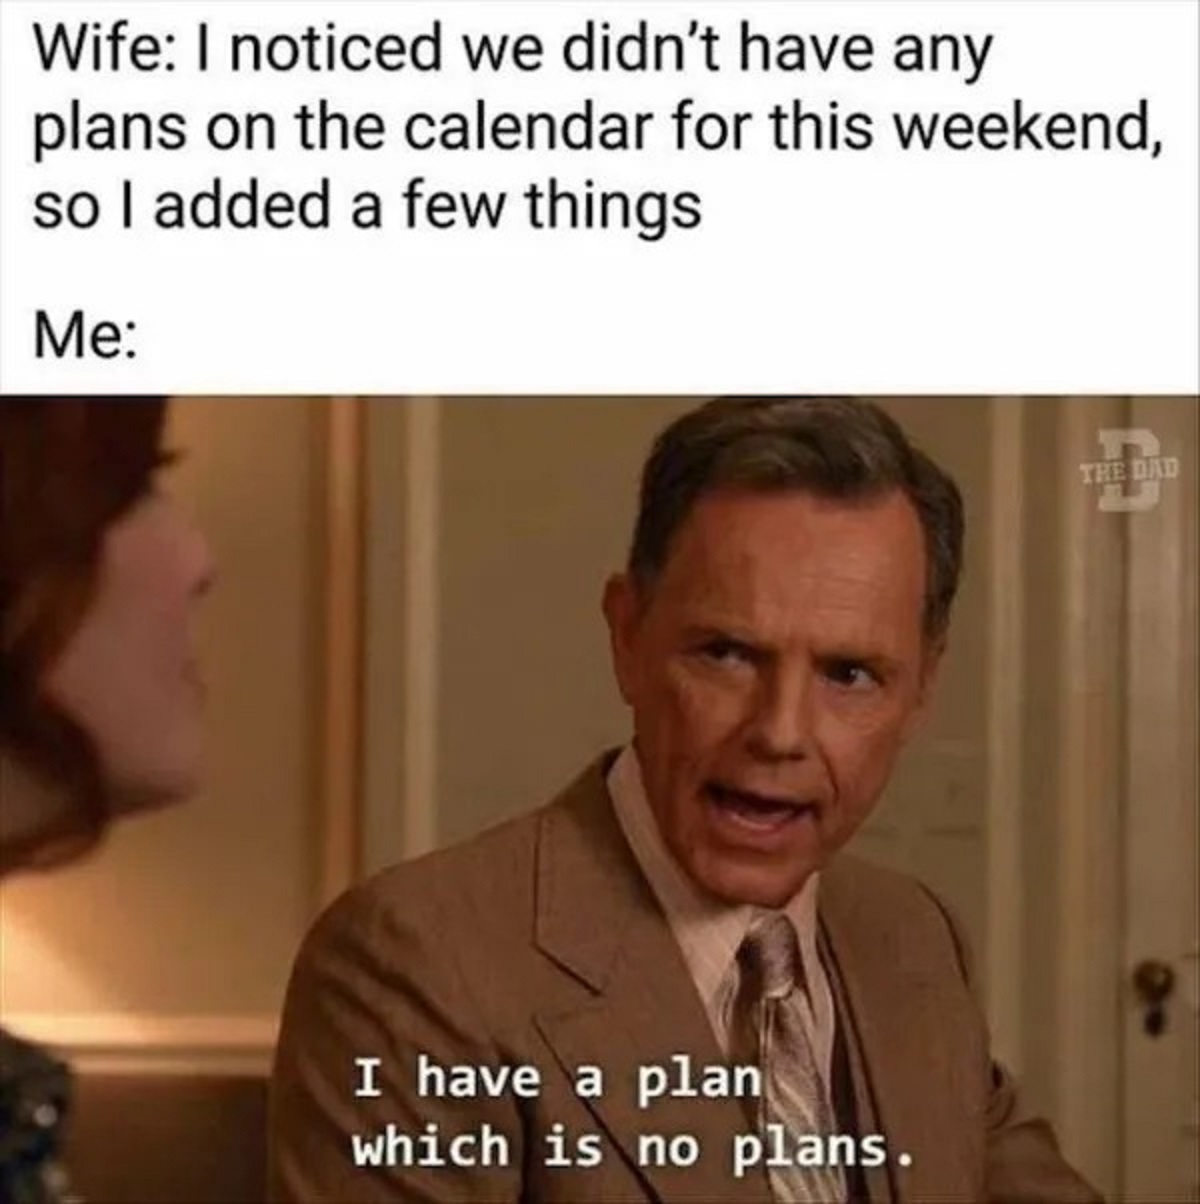 no plans meme - Wife I noticed we didn't have any plans on the calendar for this weekend, so I added a few things Me I have a plan which is no plans. The Dad